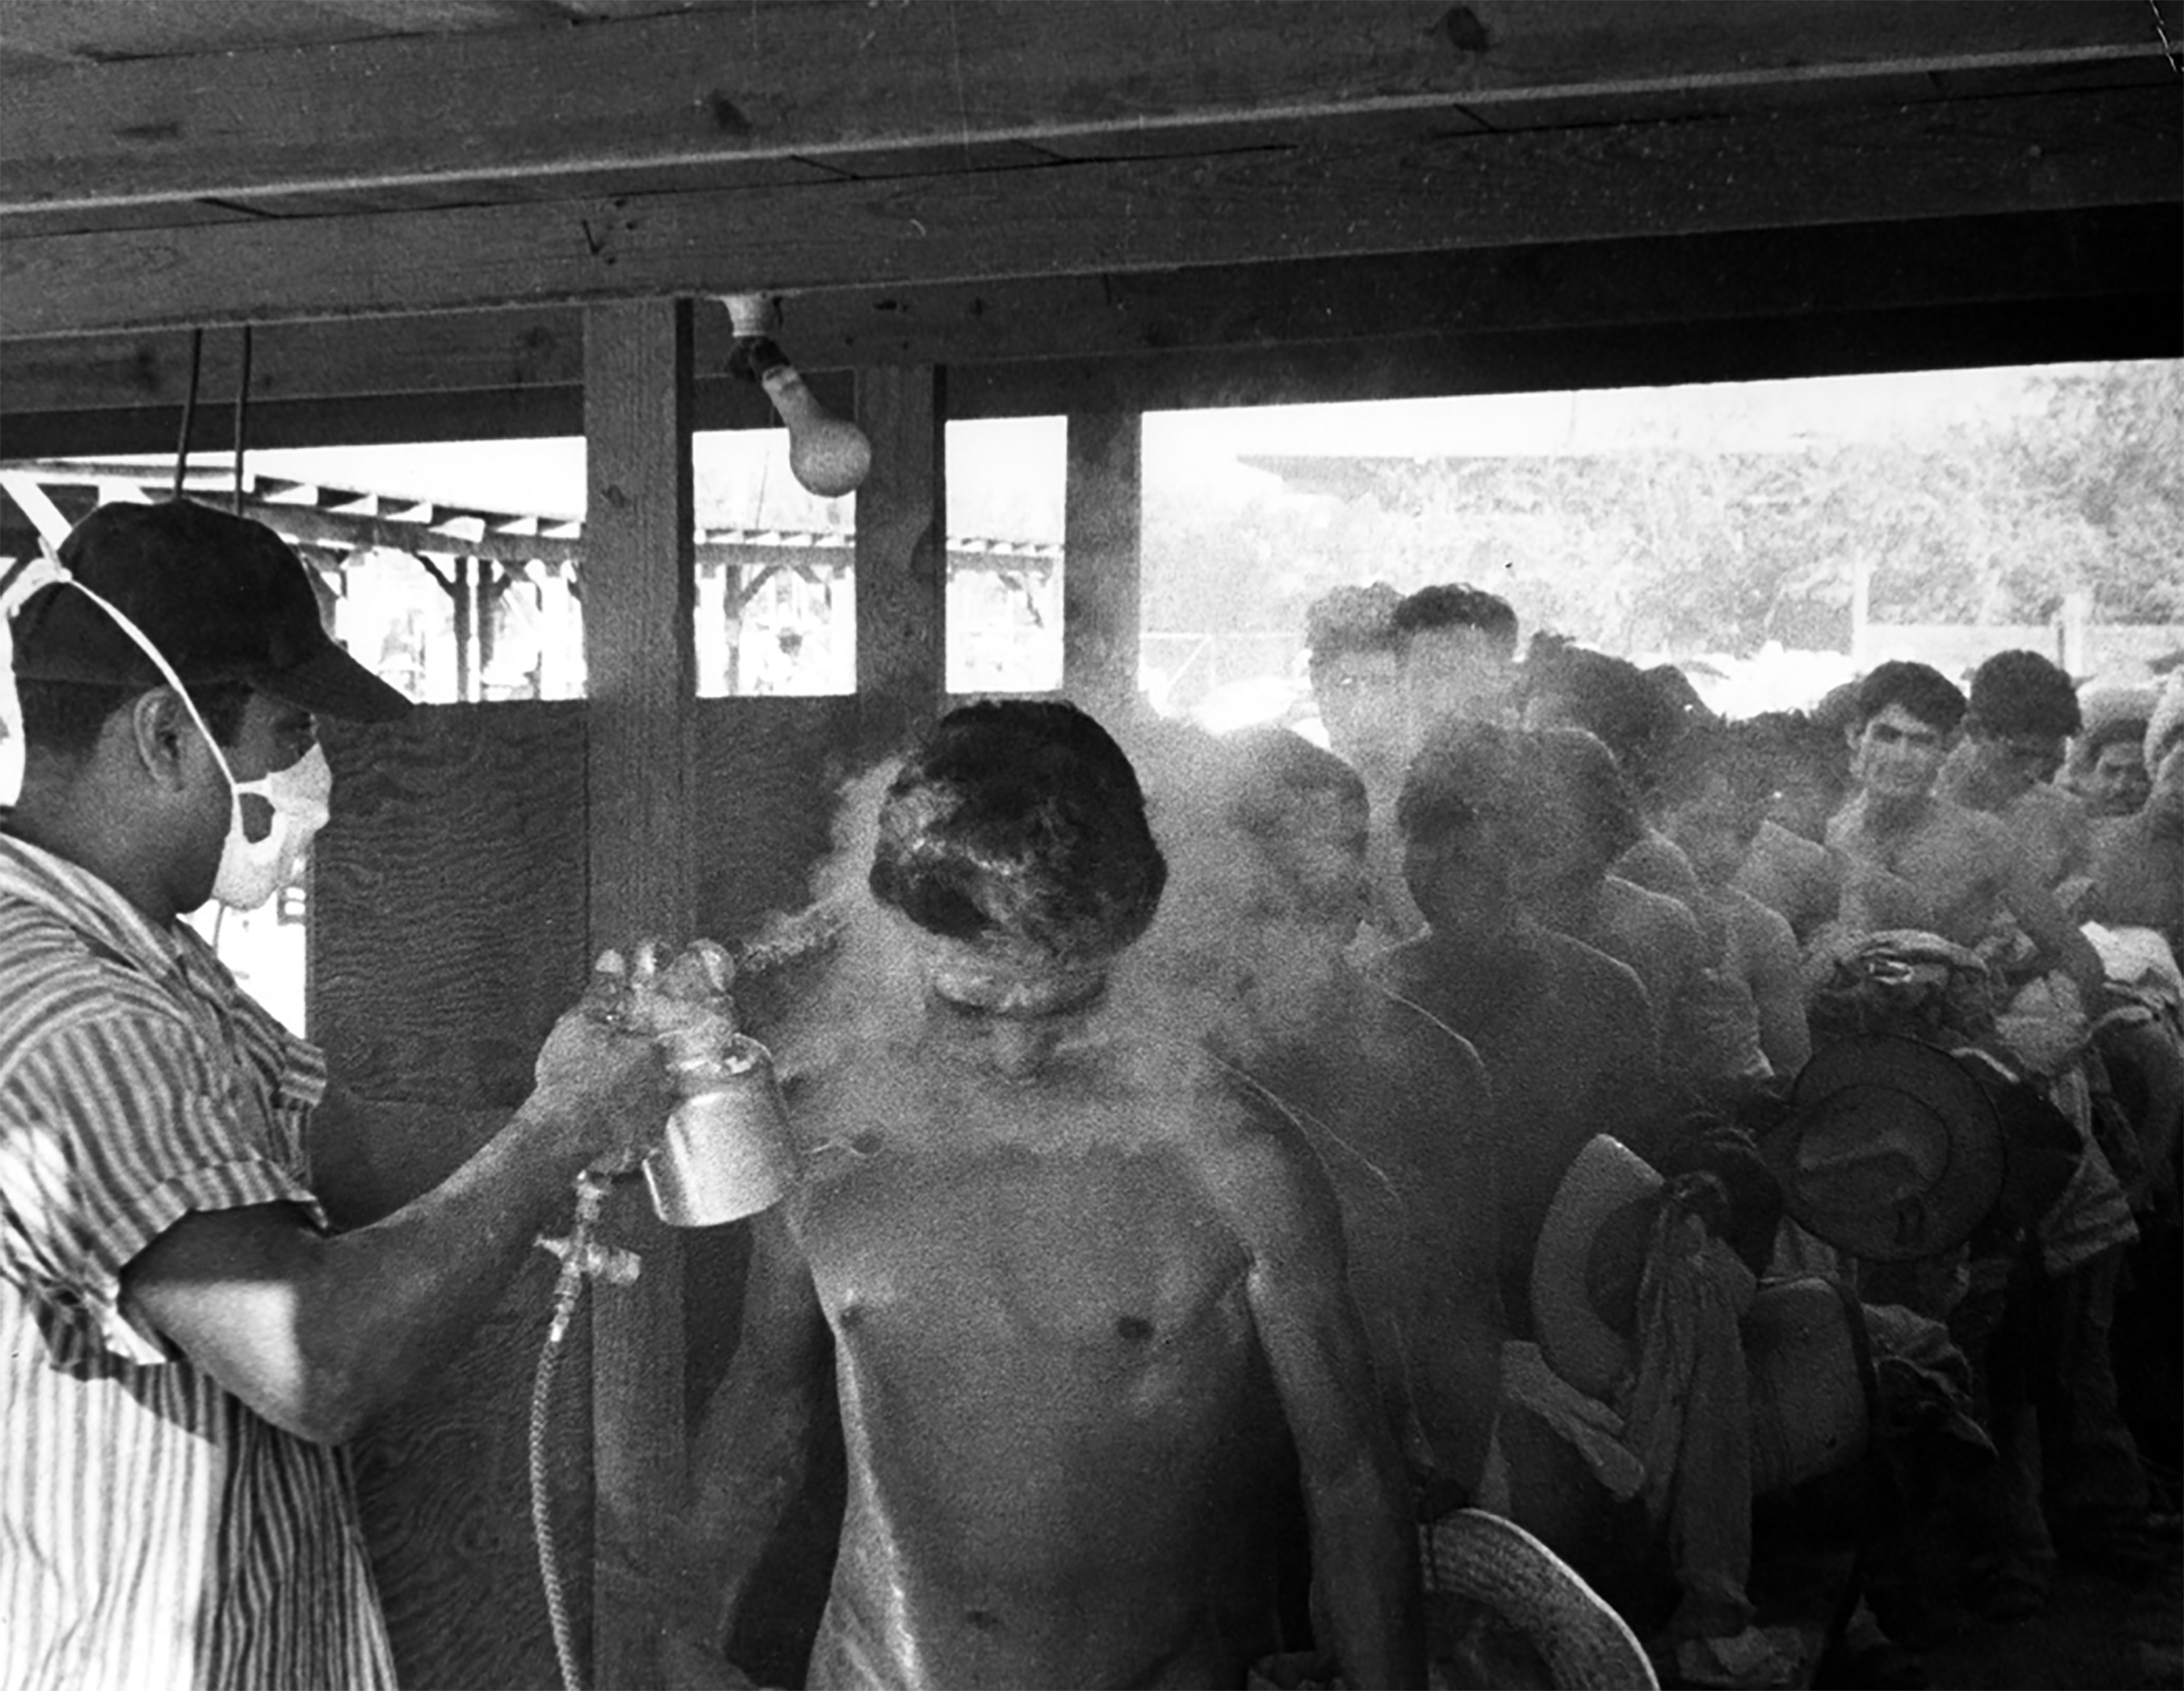 Contract Mexican laborers being fumigated with the pesticide DDT in Hidalgo, Texas in 1956. (Courtesy of the National Museum of American History)